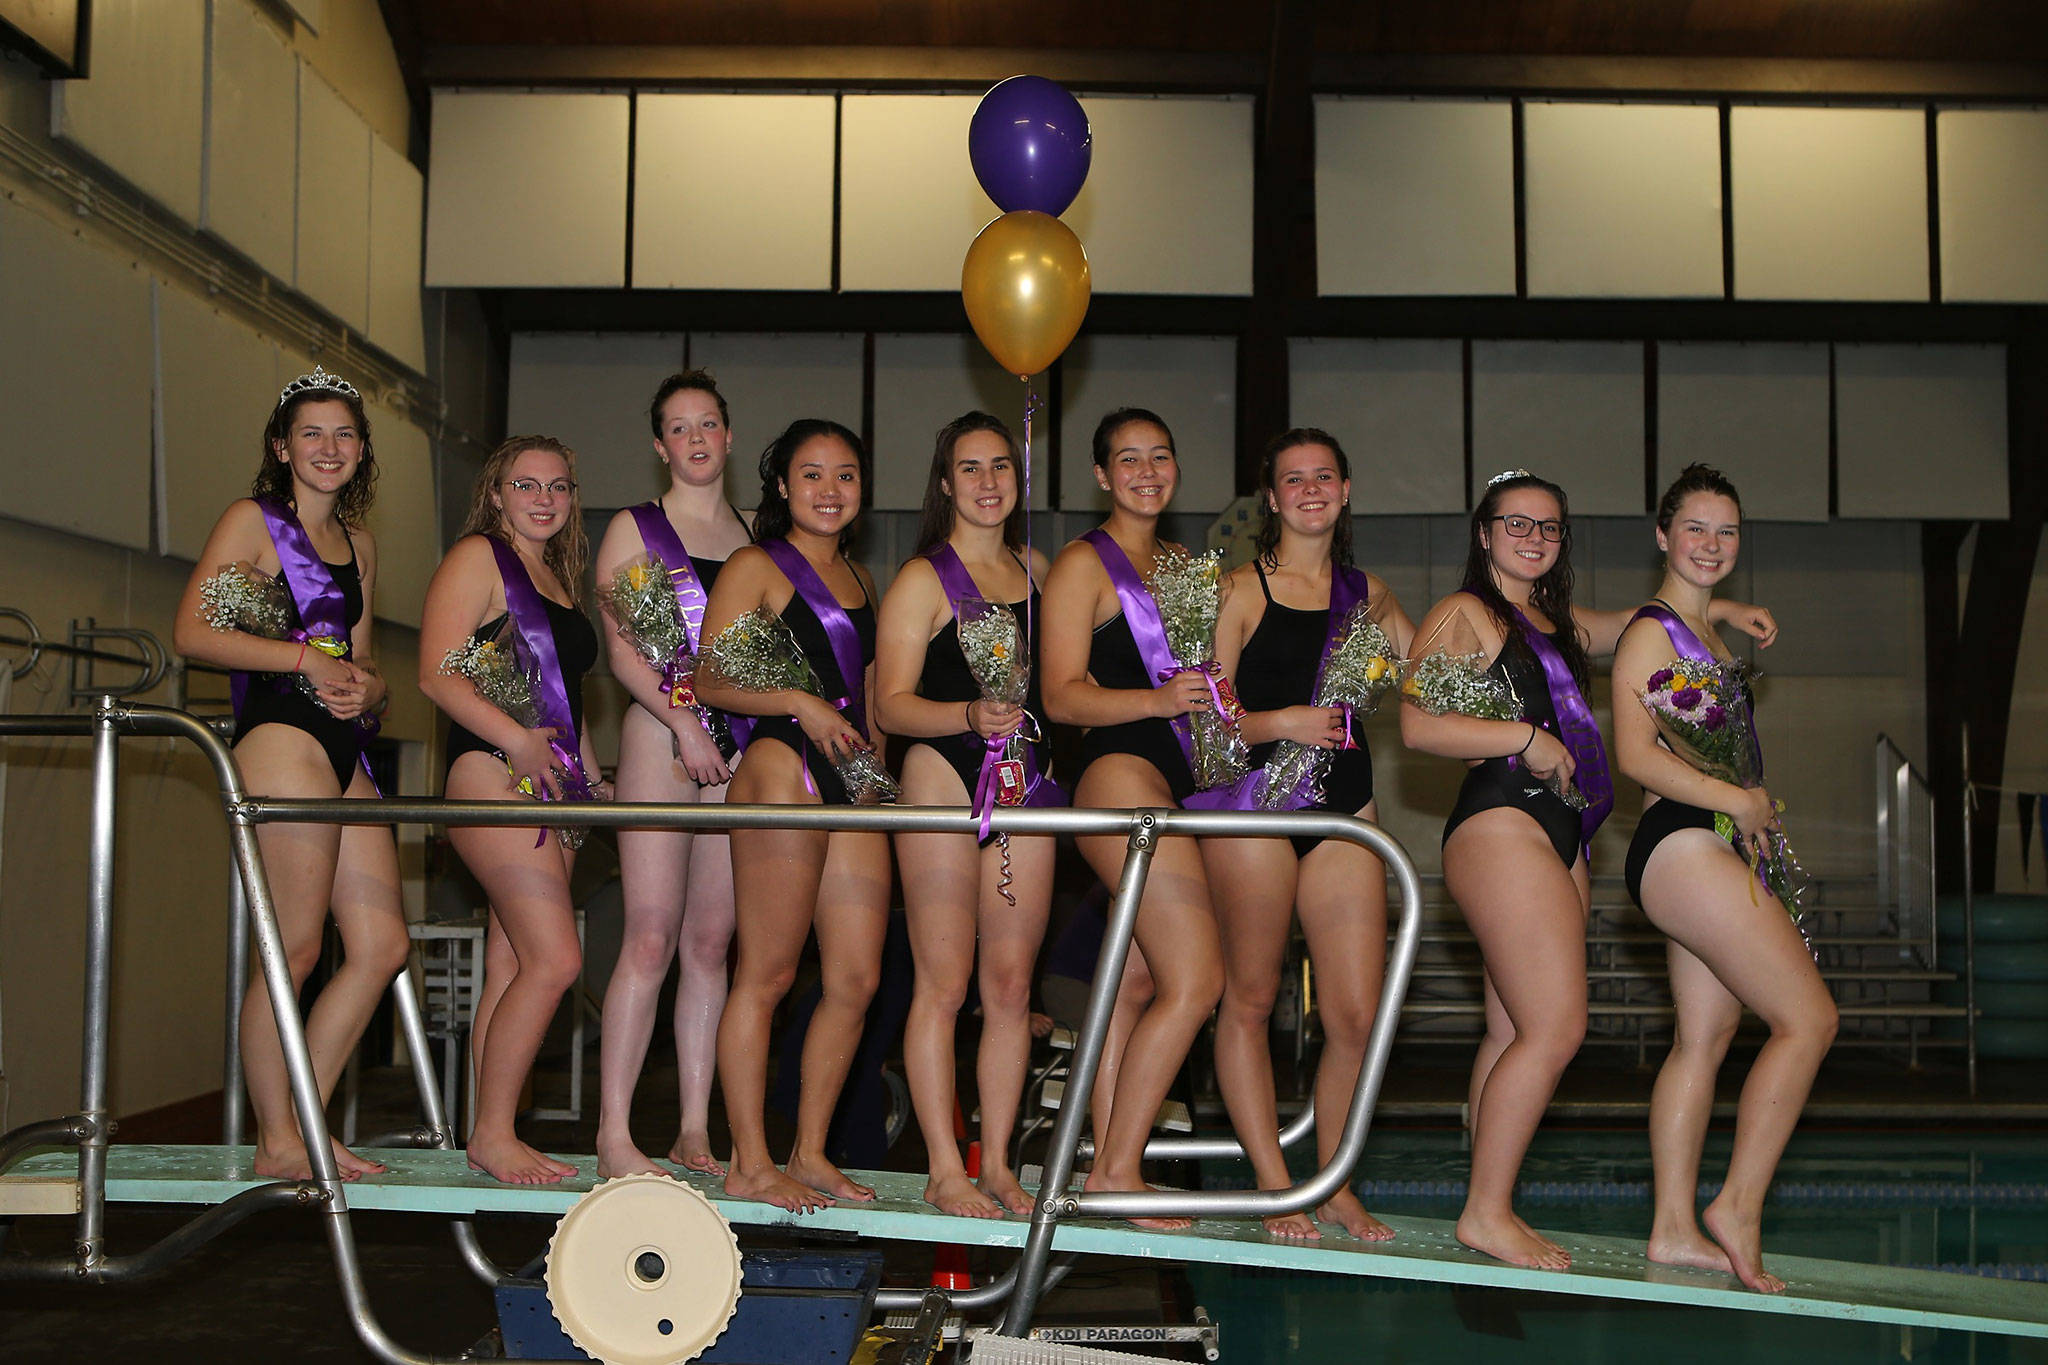 The senior members of the Oak Harbor High School swim and dive team pose after their final home meet. From the left are Scout Powell, Bailie Carroll, Jillian Pape, Naomi Garcia, Taliah Black, Olivia Tungate, Lavinia Liatti, Lydia Dorsey and Baelee Whitinger. (Photo by John Fisken)